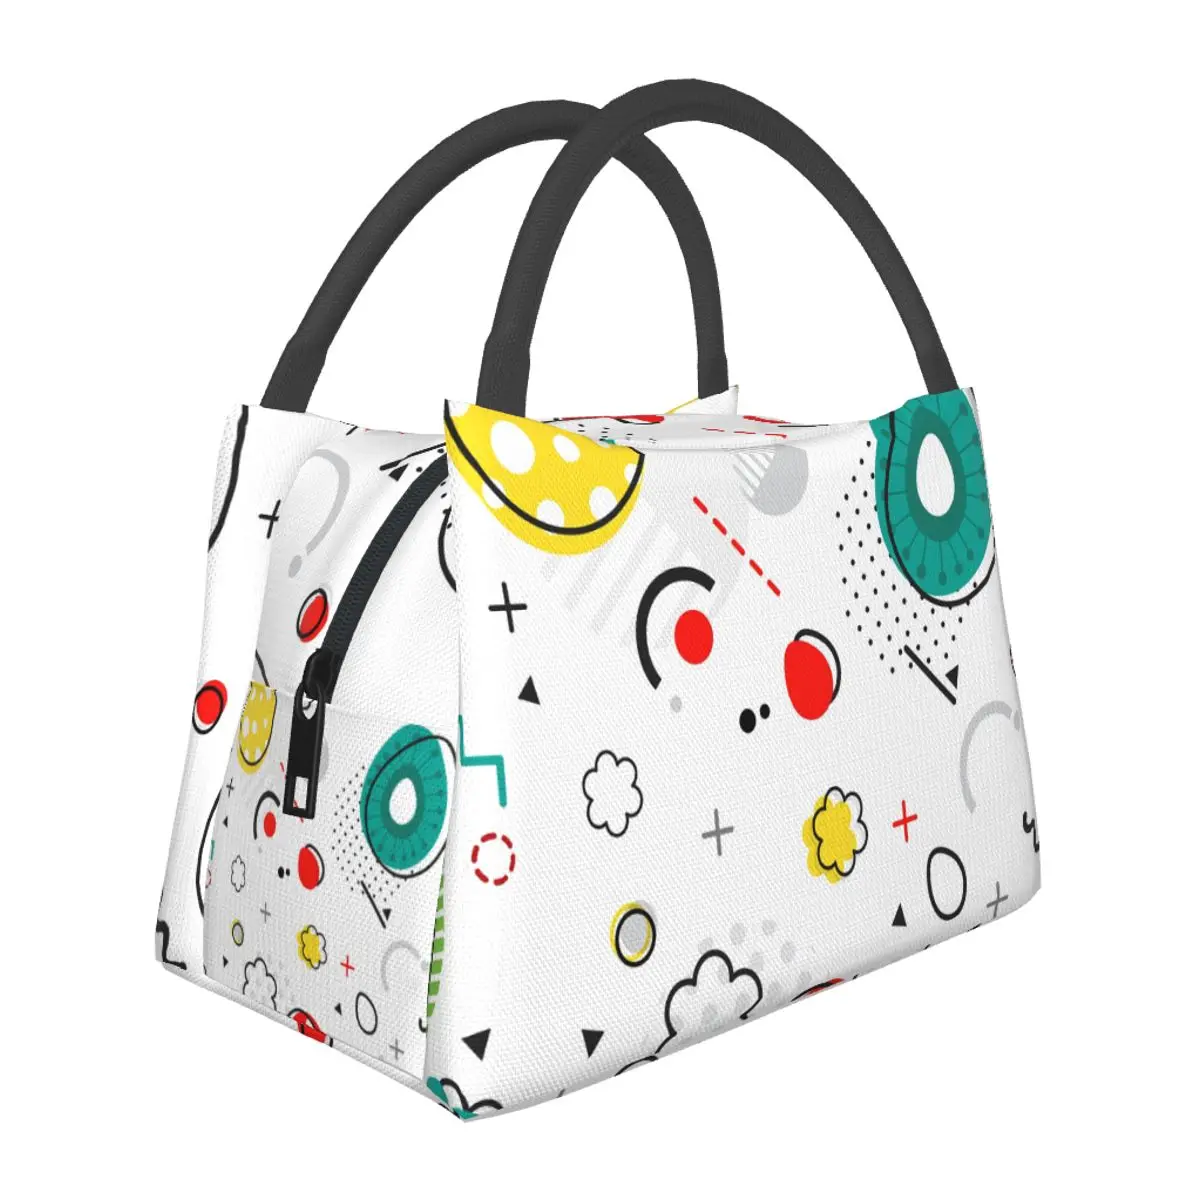 

Easter Eggs Lunch Bag Cartoon Print Art Cute Lunch Box Outdoor Picnic Portable Tote Food Bags Unisex Oxford Designer Cooler Bag